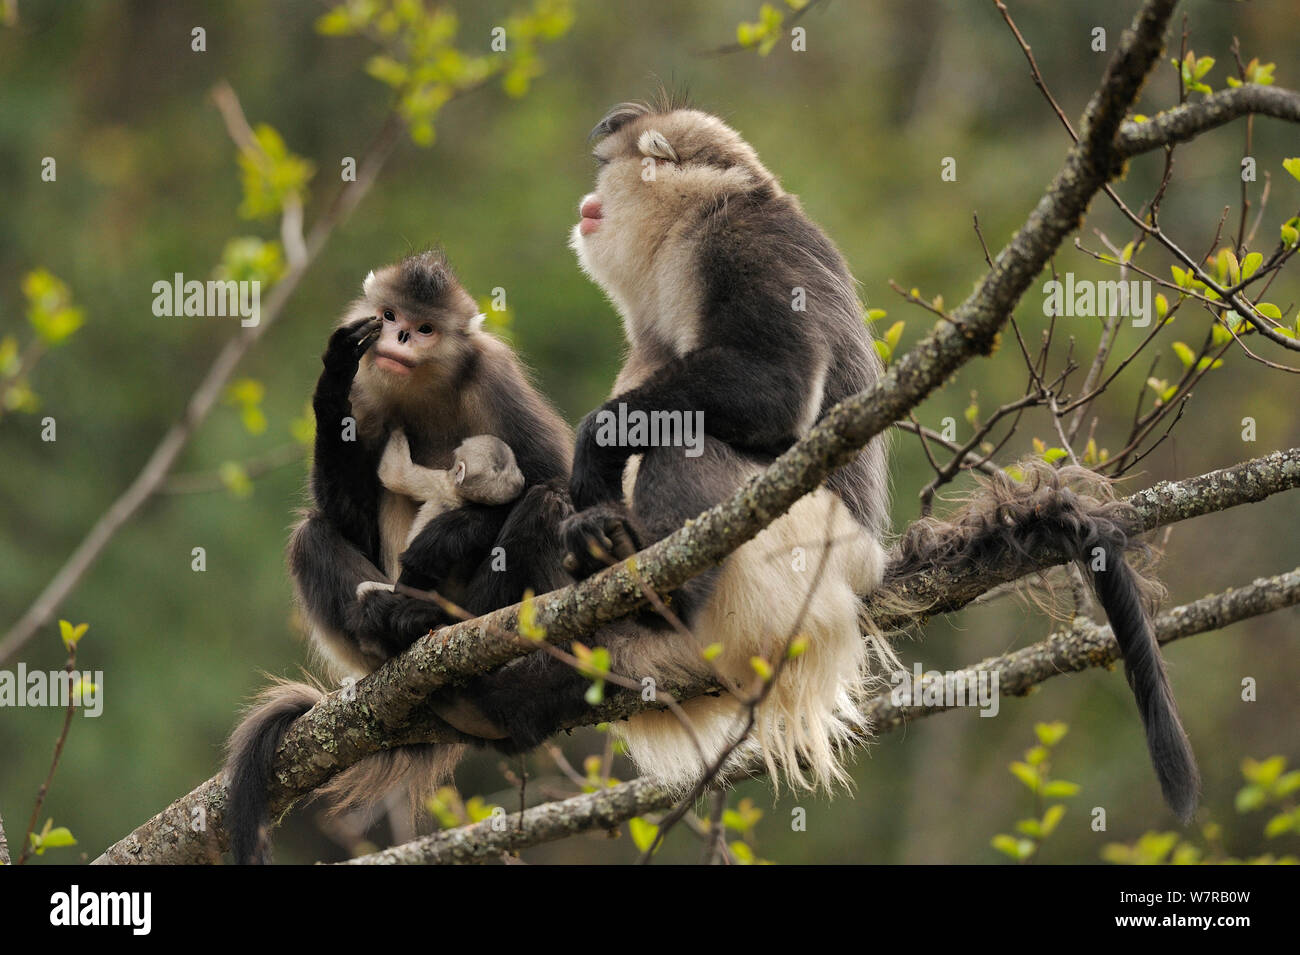 Yunnan Snub-nosed monkey (Rhinopithecus bieti) two adults and one baby sitting in tree, Ta Chen NP, Yunnan province, China Stock Photo